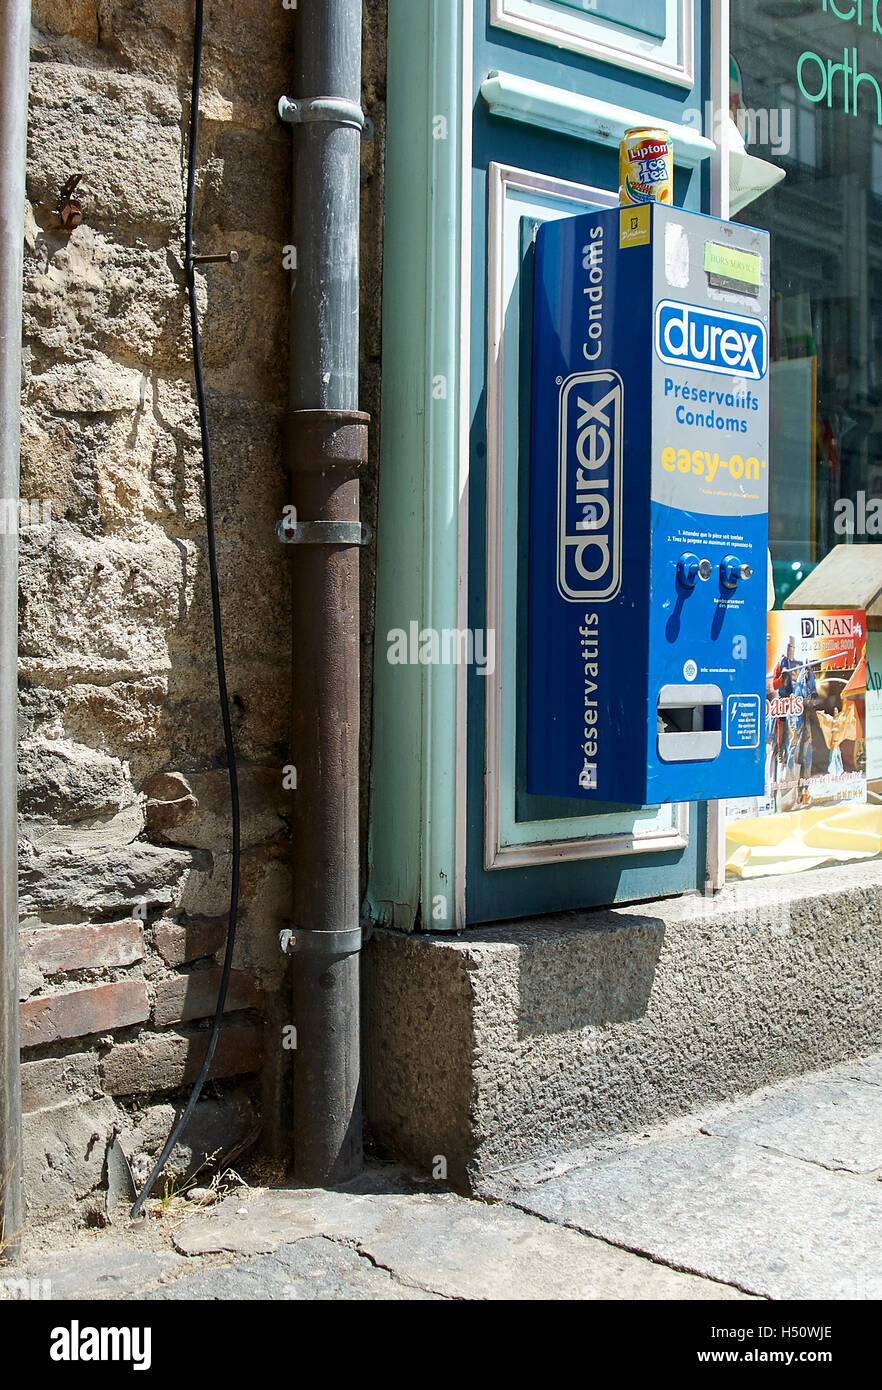 A durex vending  machine on a outside a shop in Dinan  France. A durex vending  machine on a outside a shop in Dinan  France. Stock Photo